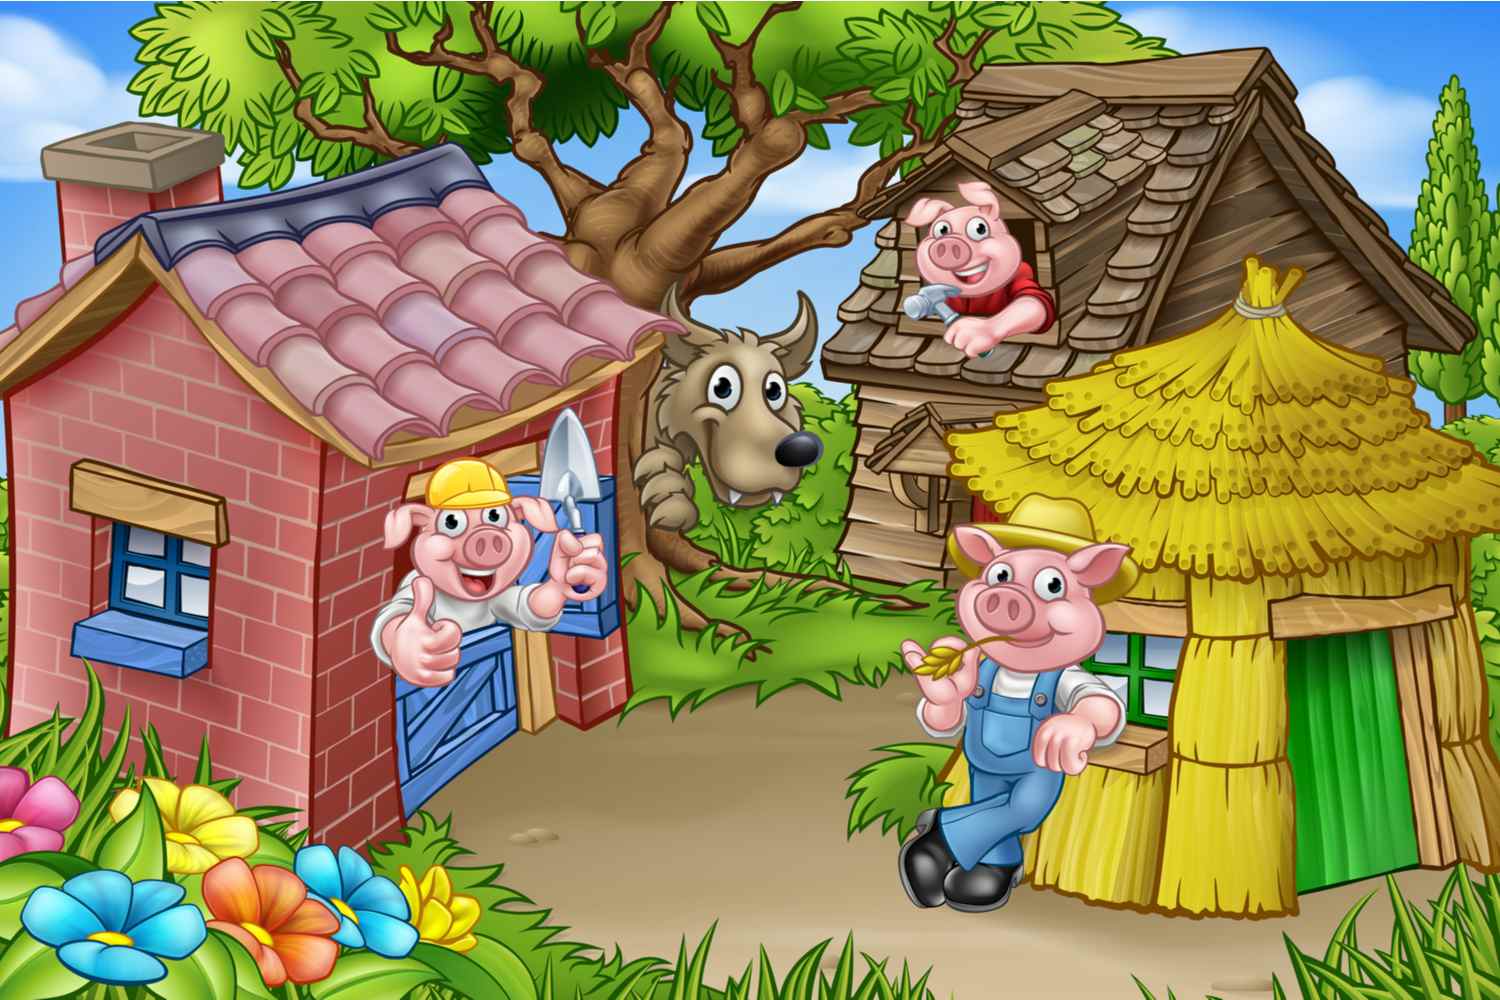 The Three Little Pigs story